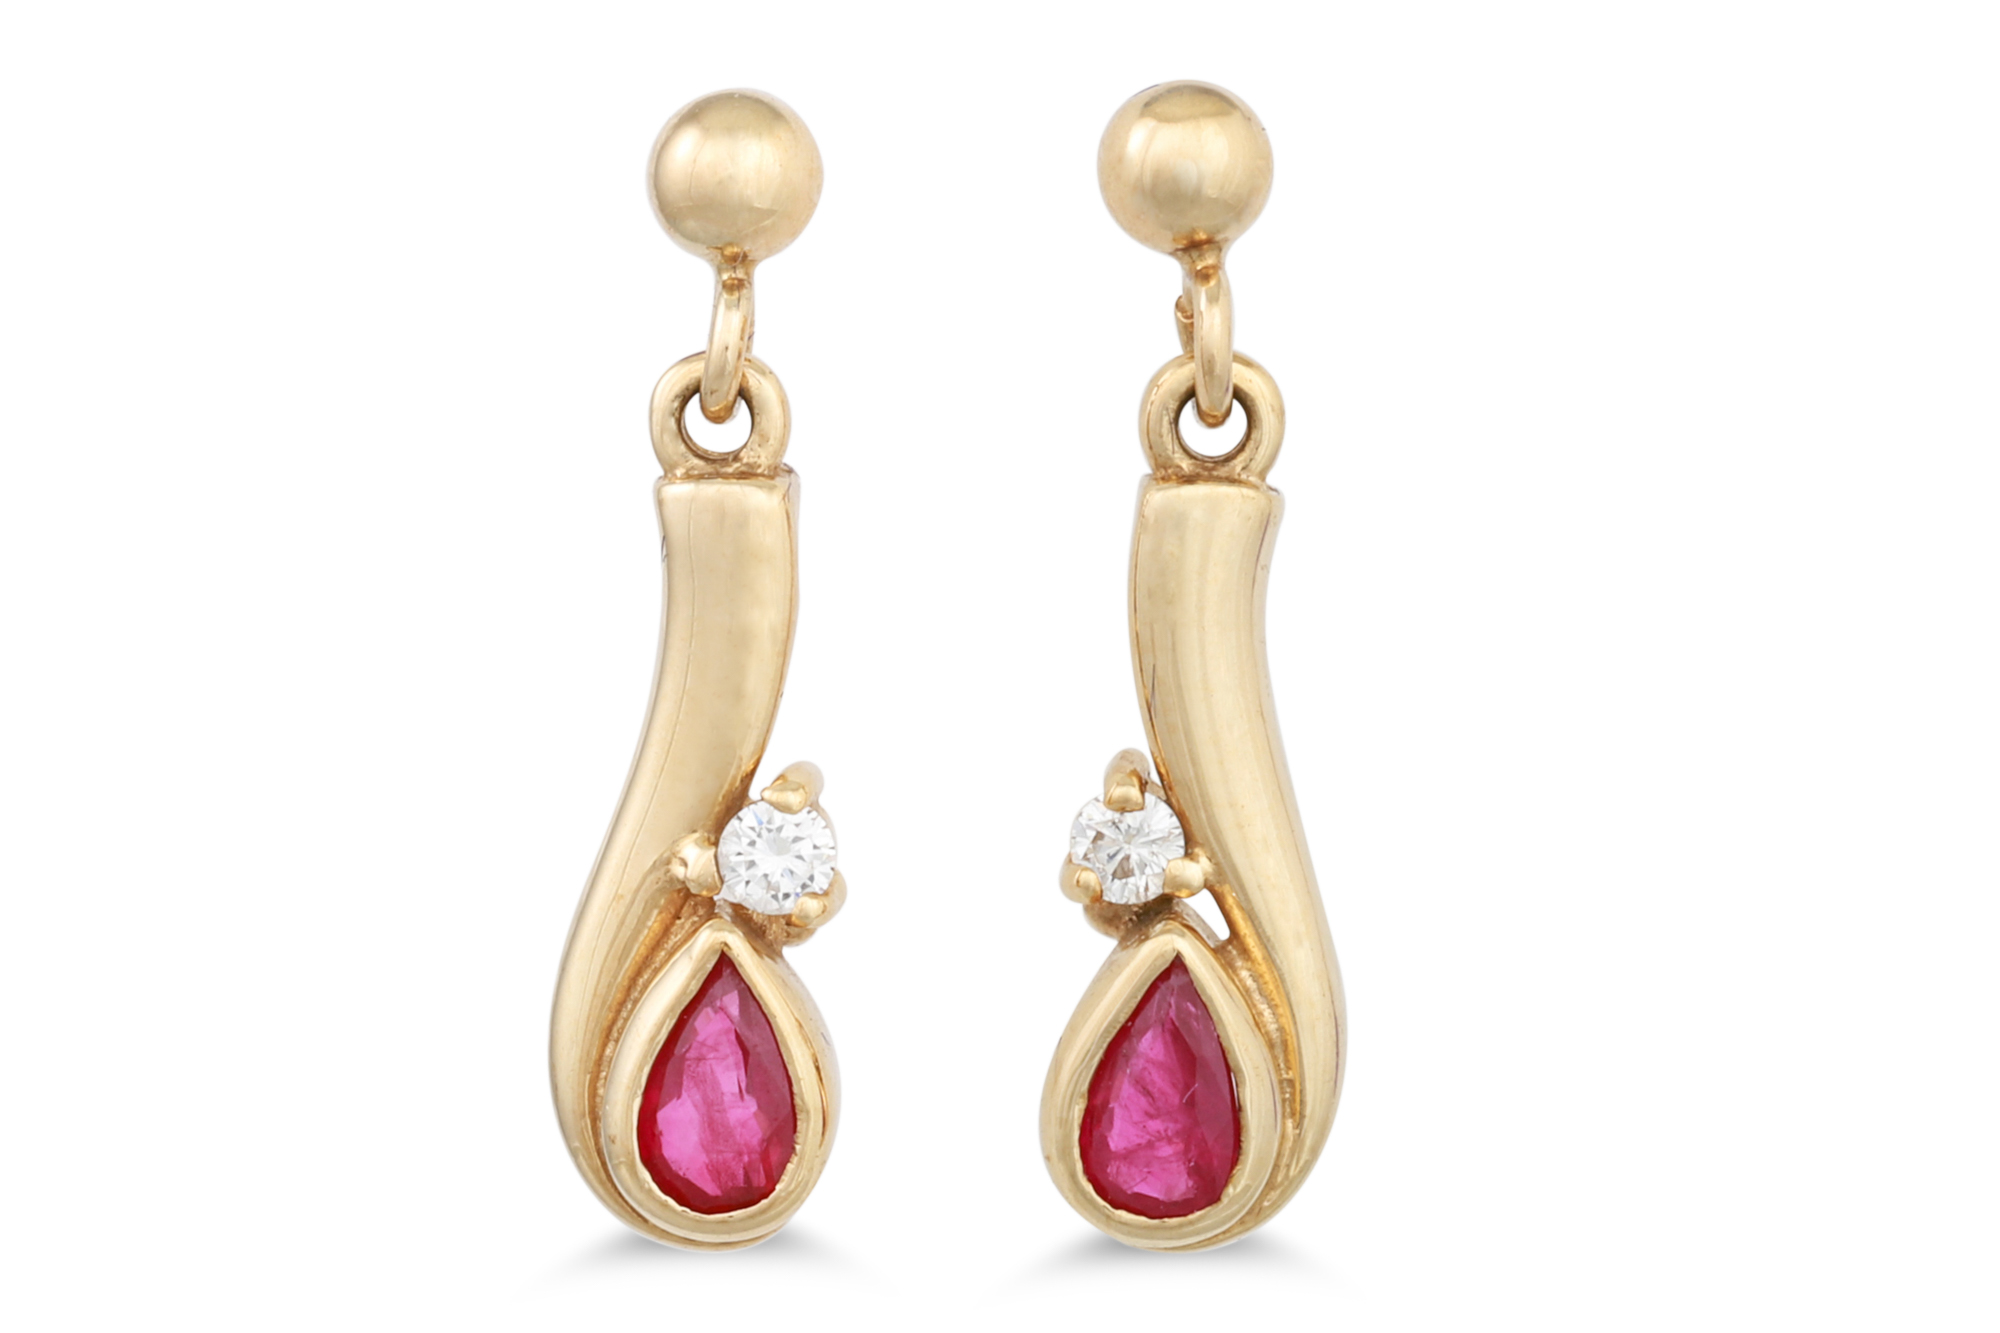 A PAIR OF DIAMOND AND RUBY DROP EARRINGS, mounted in 18ct gold